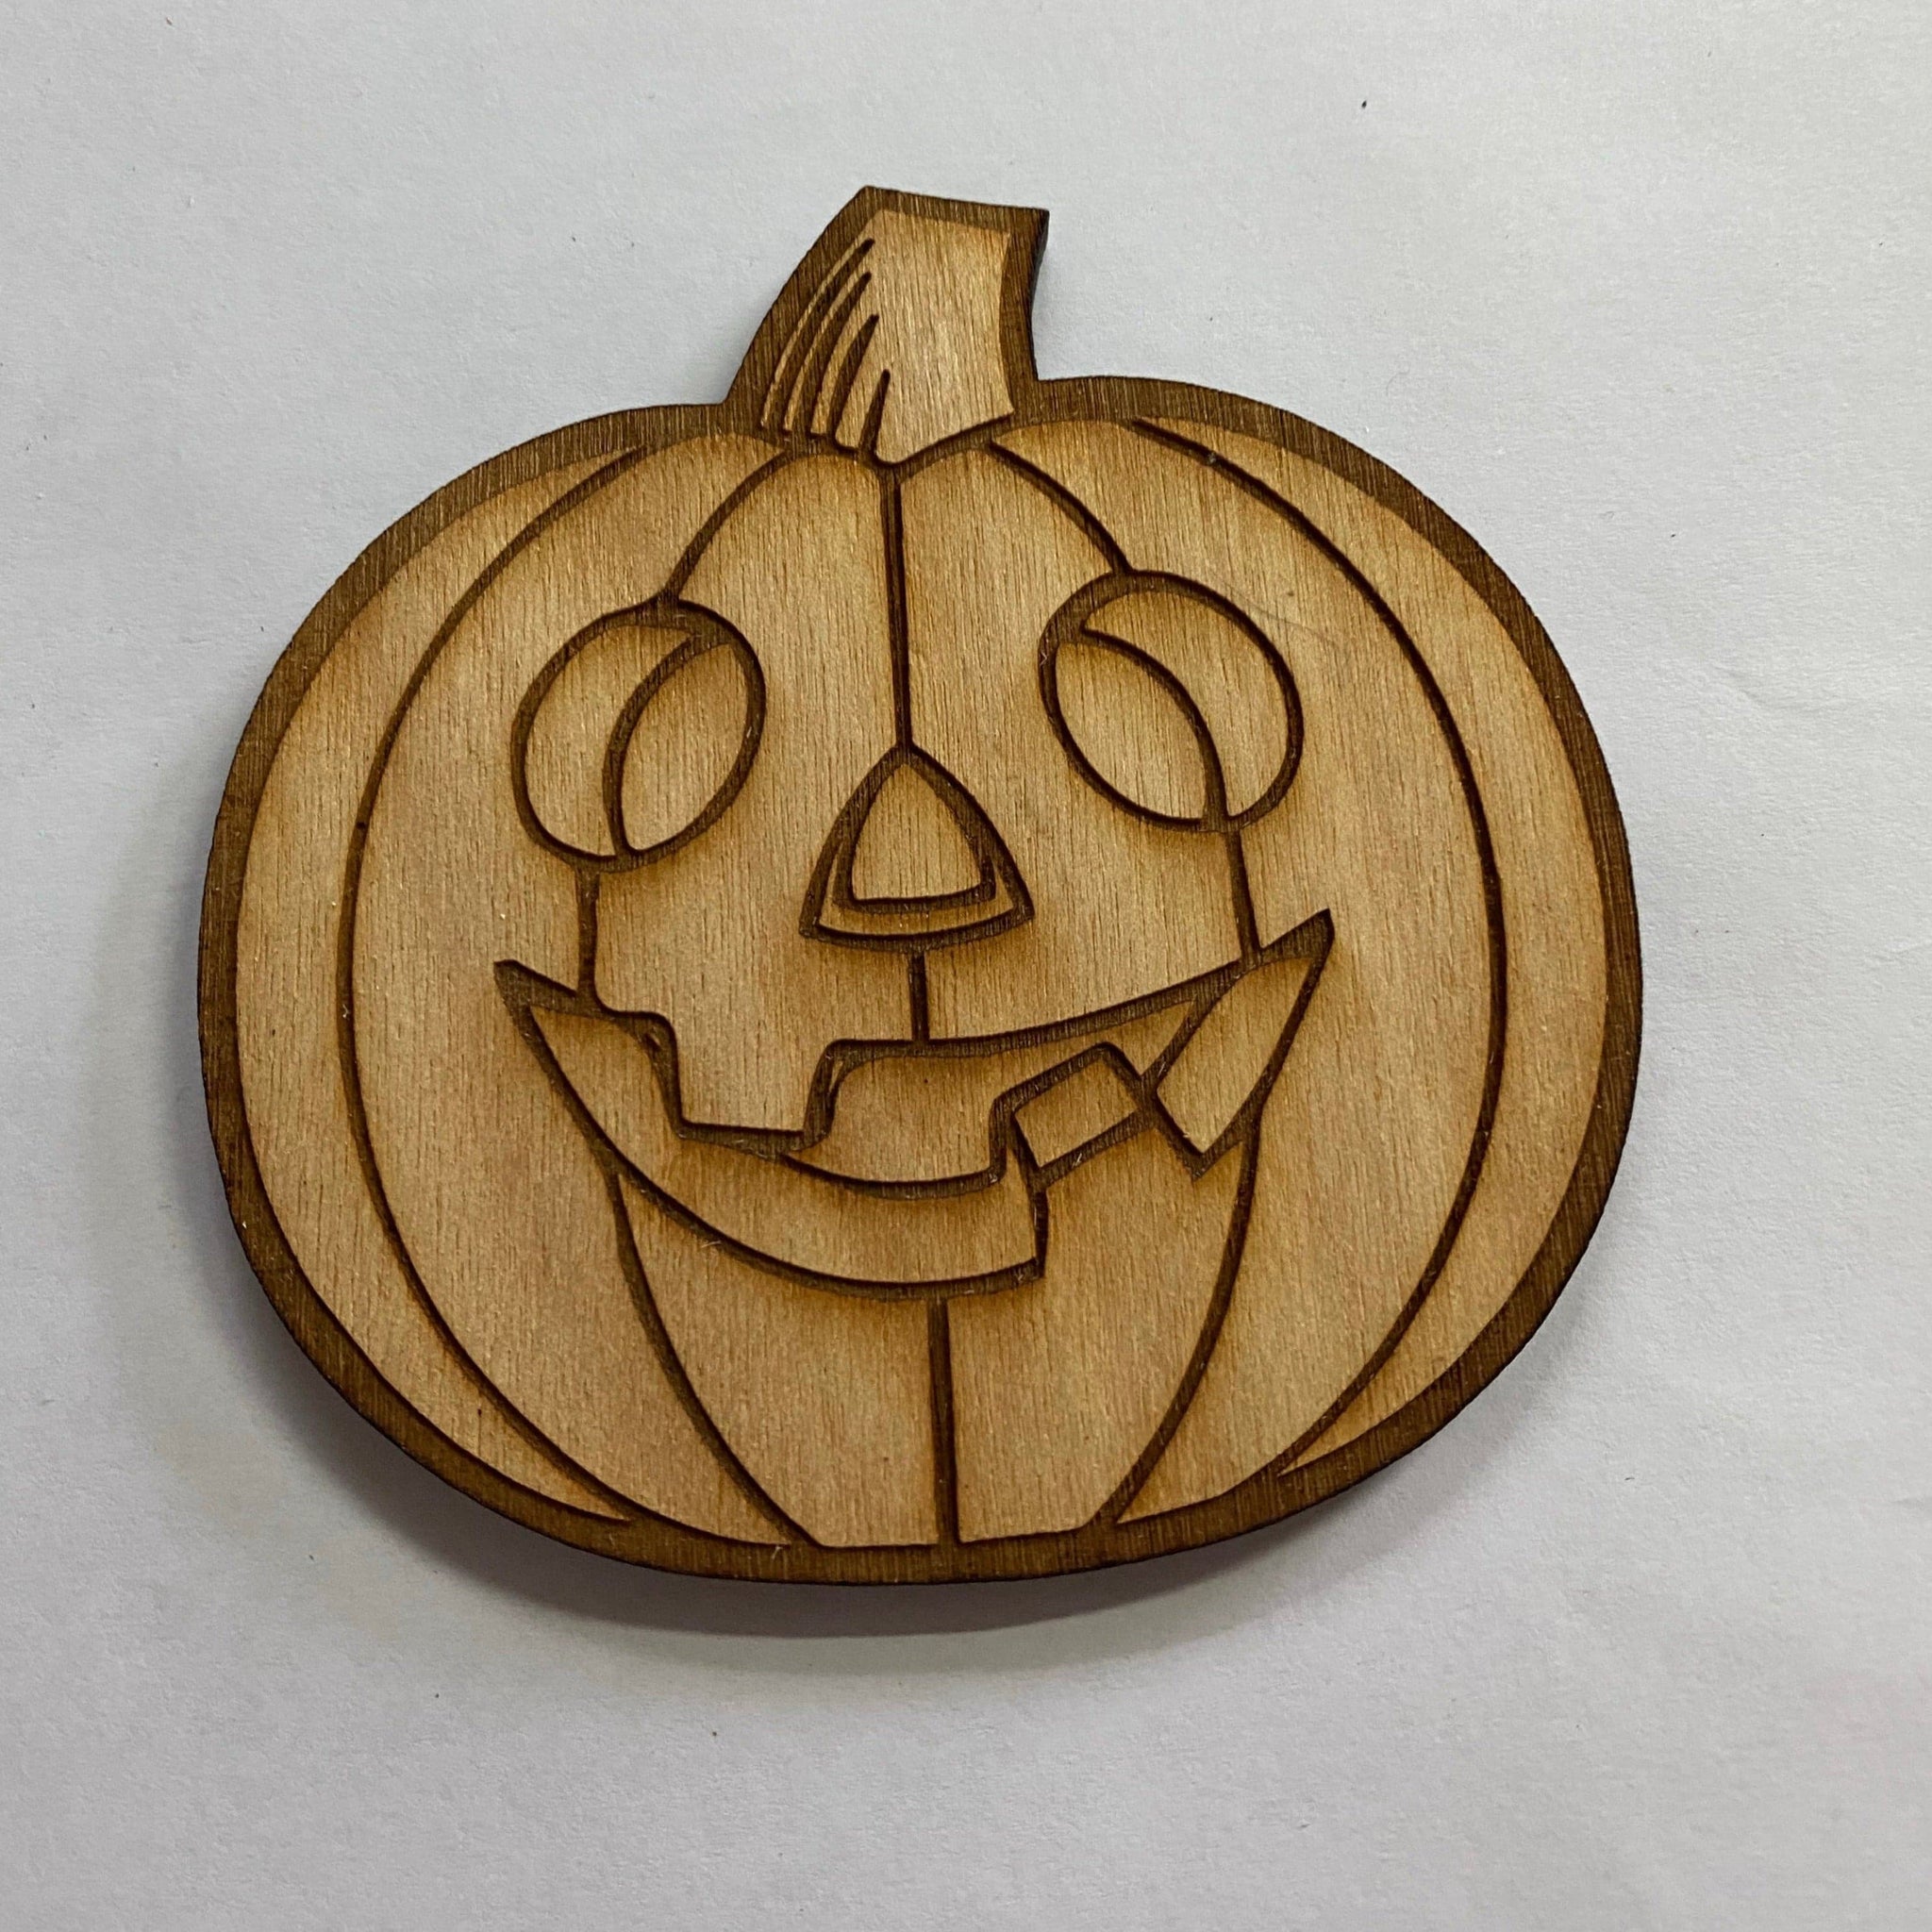 Kid Craft. Wooden Pumpkin Cut Out. Halloween Wooden Blank. Unfinished Wood Blanks. - C & A Engraving and Gifts